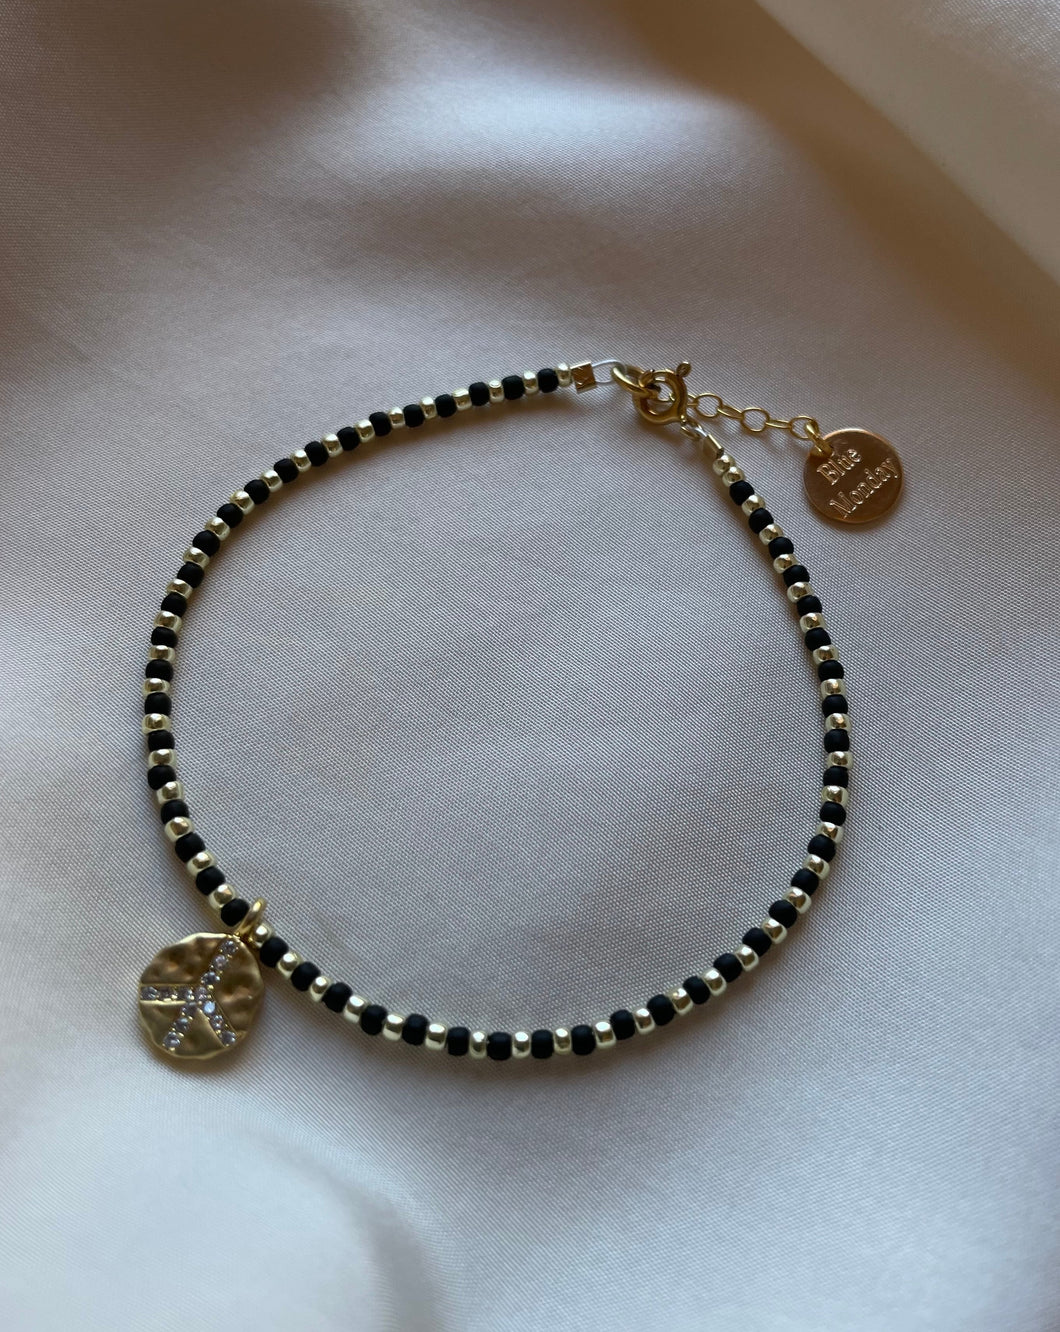 Peace out in gemstones - Black and Gold bracelet